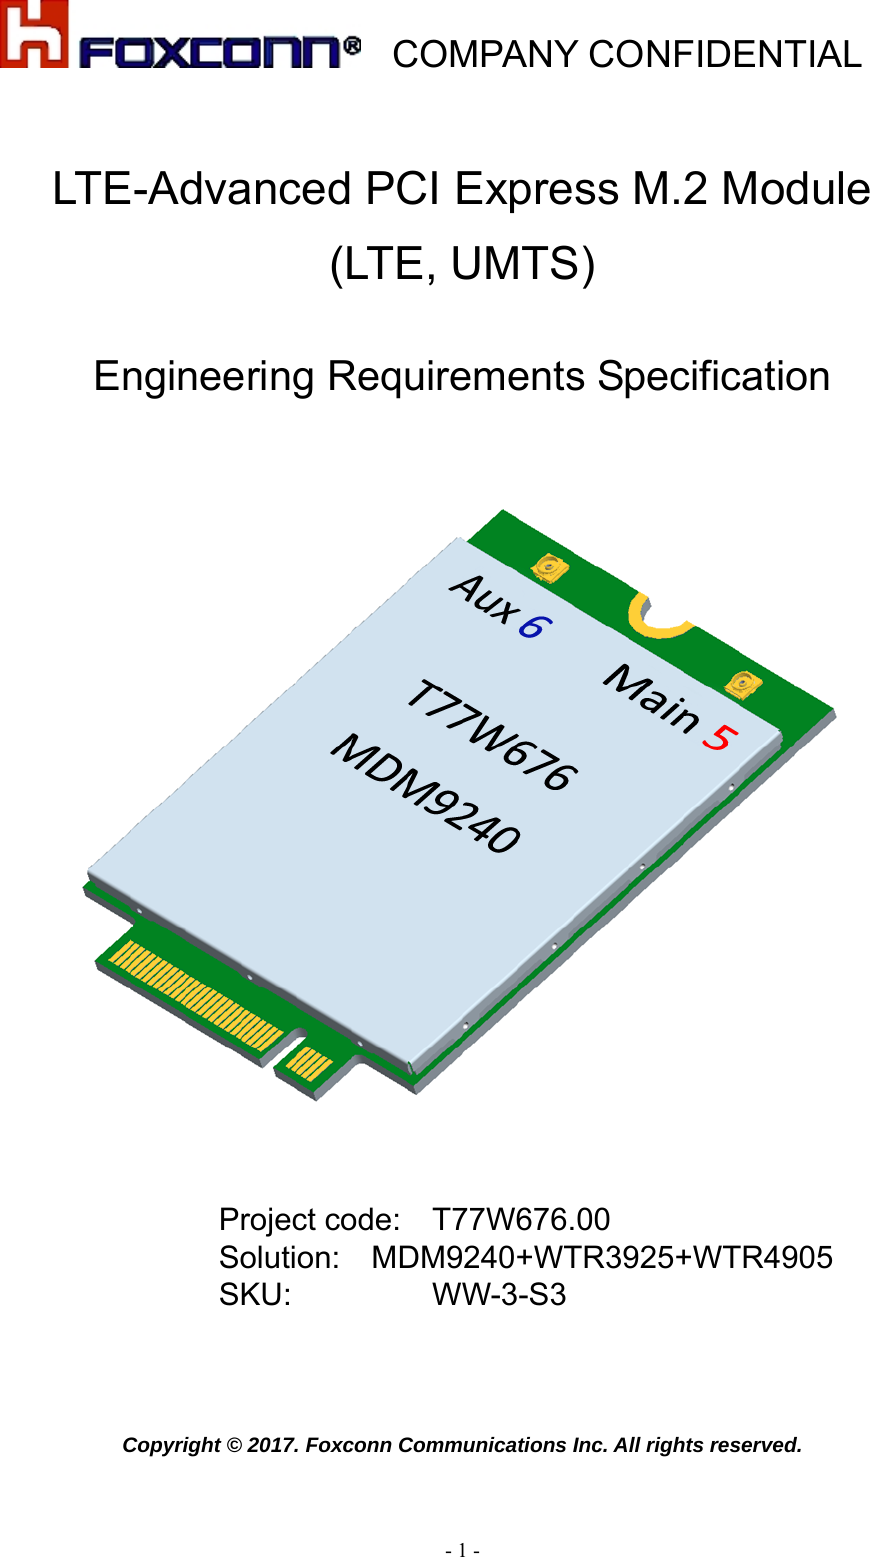    COMPANY CONFIDENTIAL - 1 -  LTE-Advanced PCI Express M.2 Module   (LTE, UMTS)  Engineering Requirements Specification                Project code:    T77W676.00 Solution:  MDM9240+WTR3925+WTR4905 SKU:         WW-3-S3    Copyright © 2017. Foxconn Communications Inc. All rights reserved. 